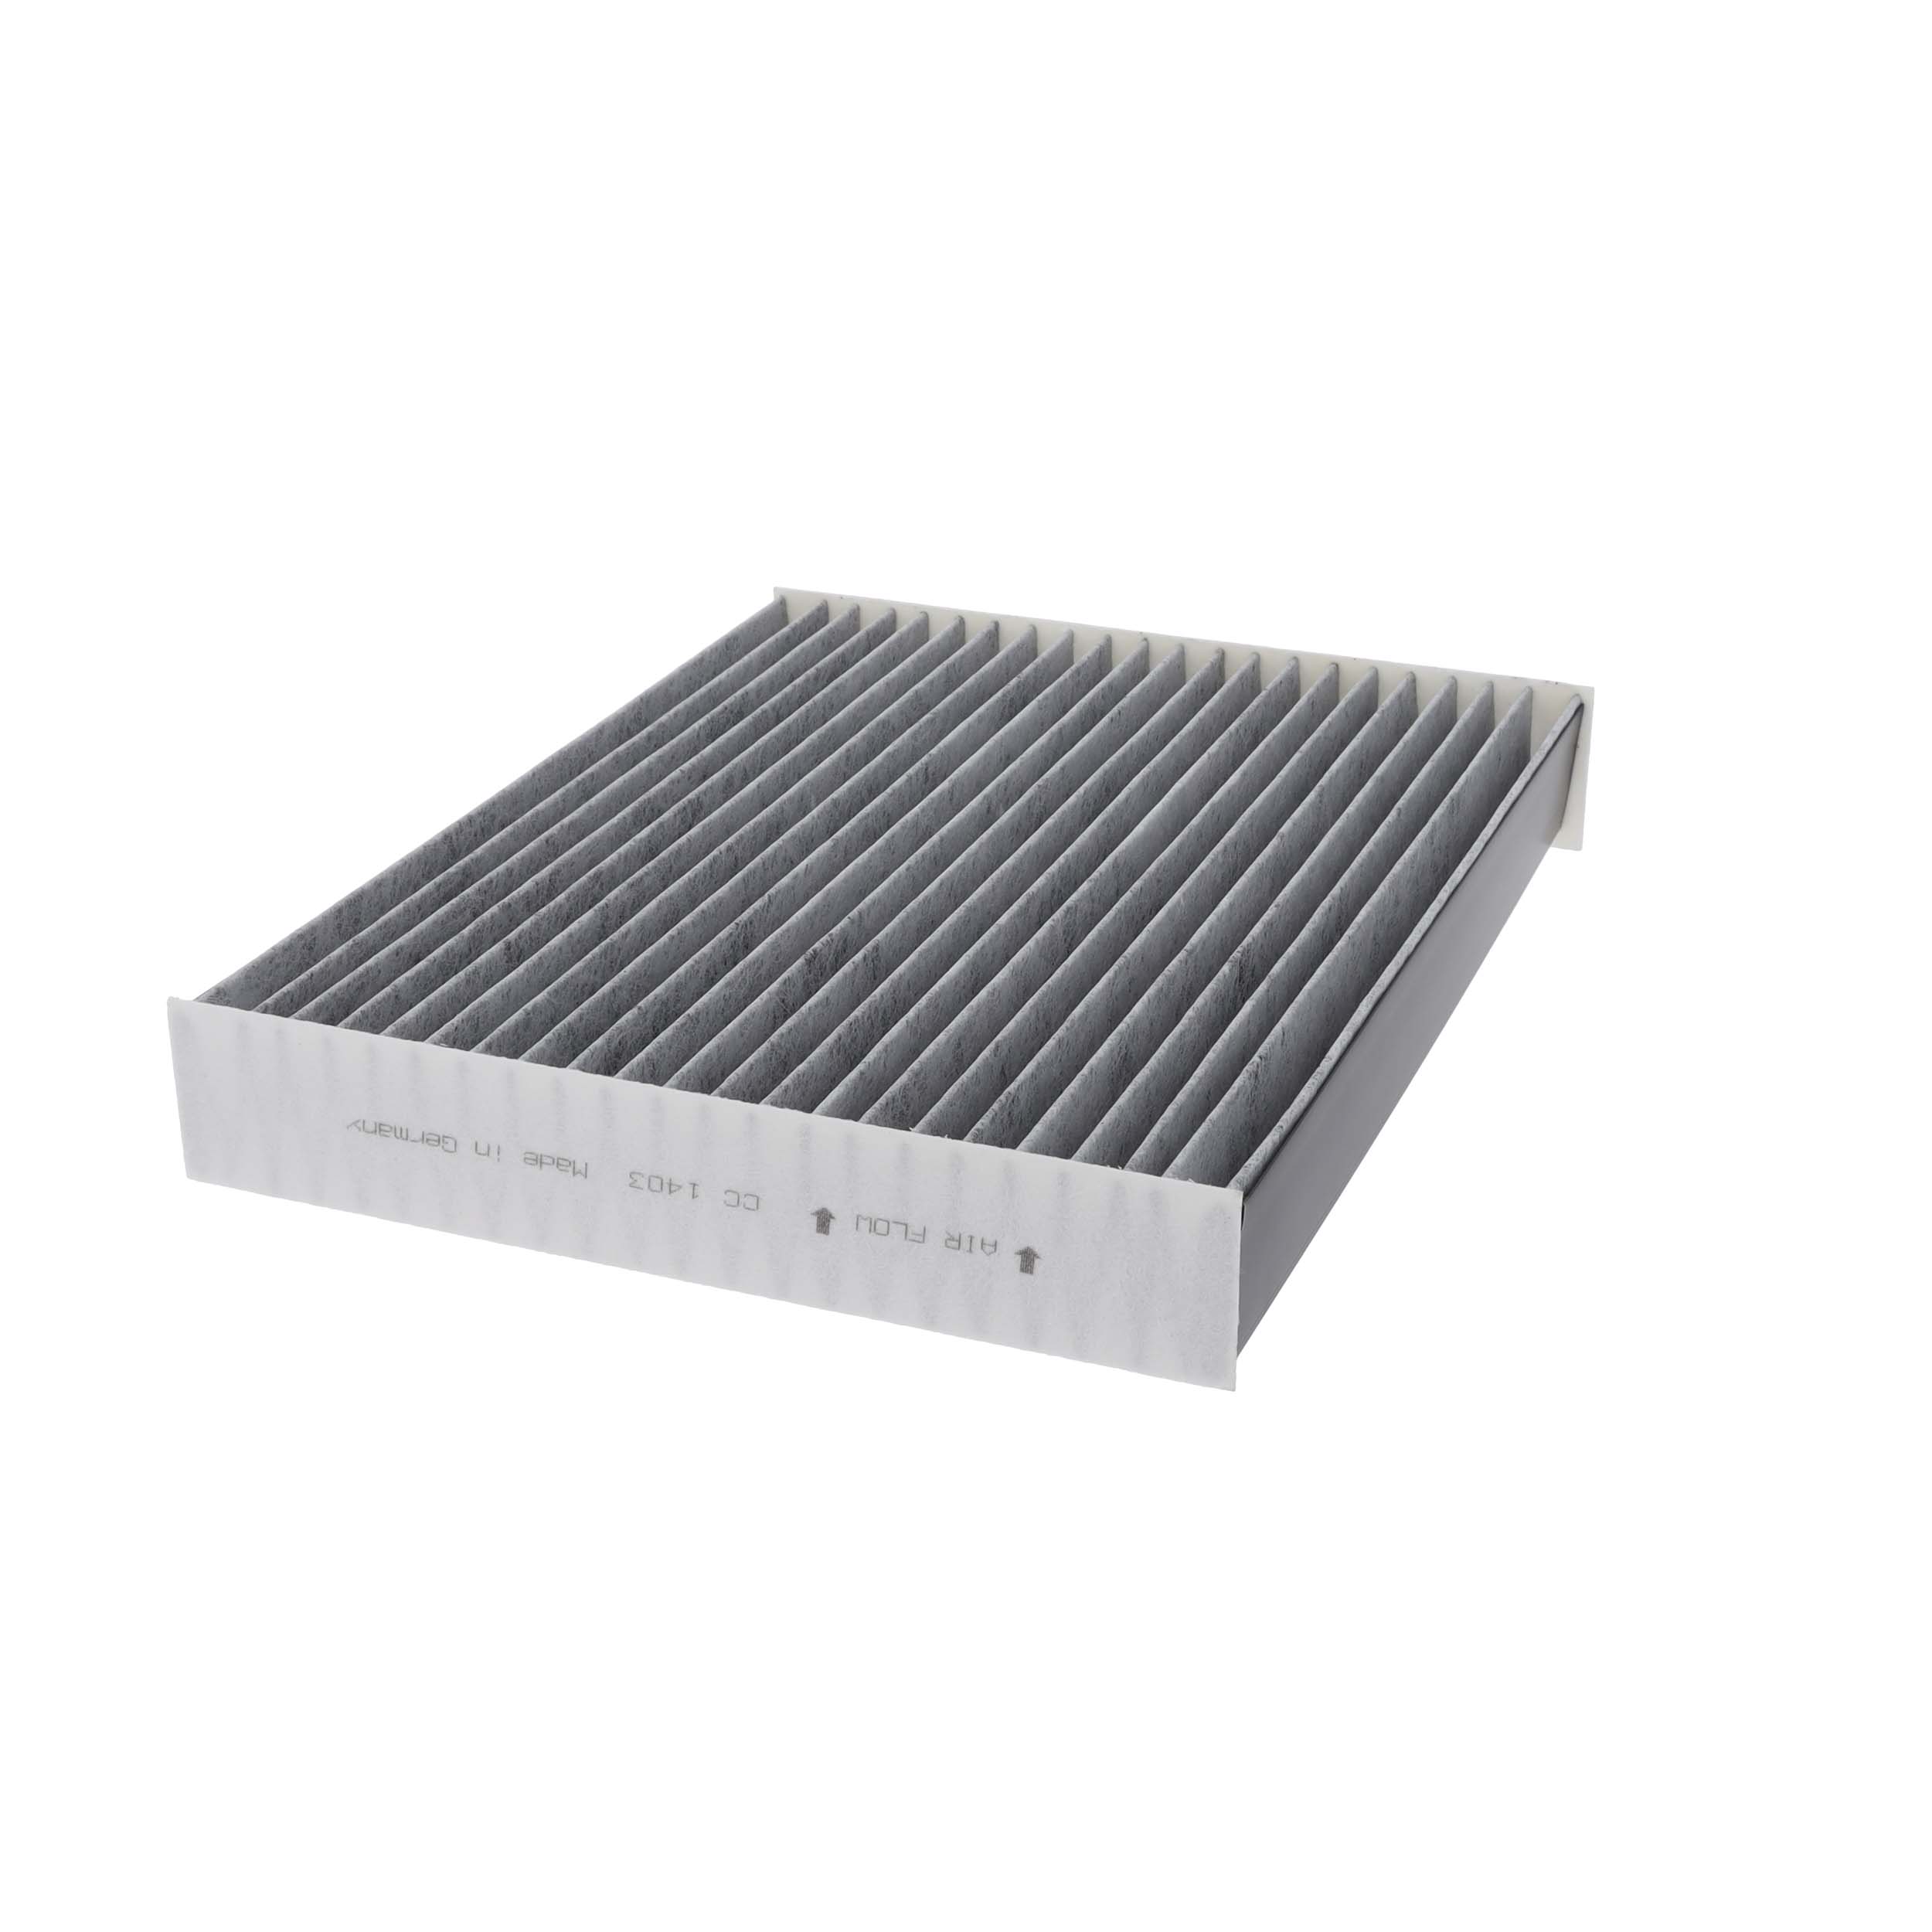 CORTECO Activated Carbon Filter, 276 mm x 217 mm x 40 mm, Activated Carbon Width: 217mm, Height: 40mm, Length: 276mm Cabin filter 80001741 buy